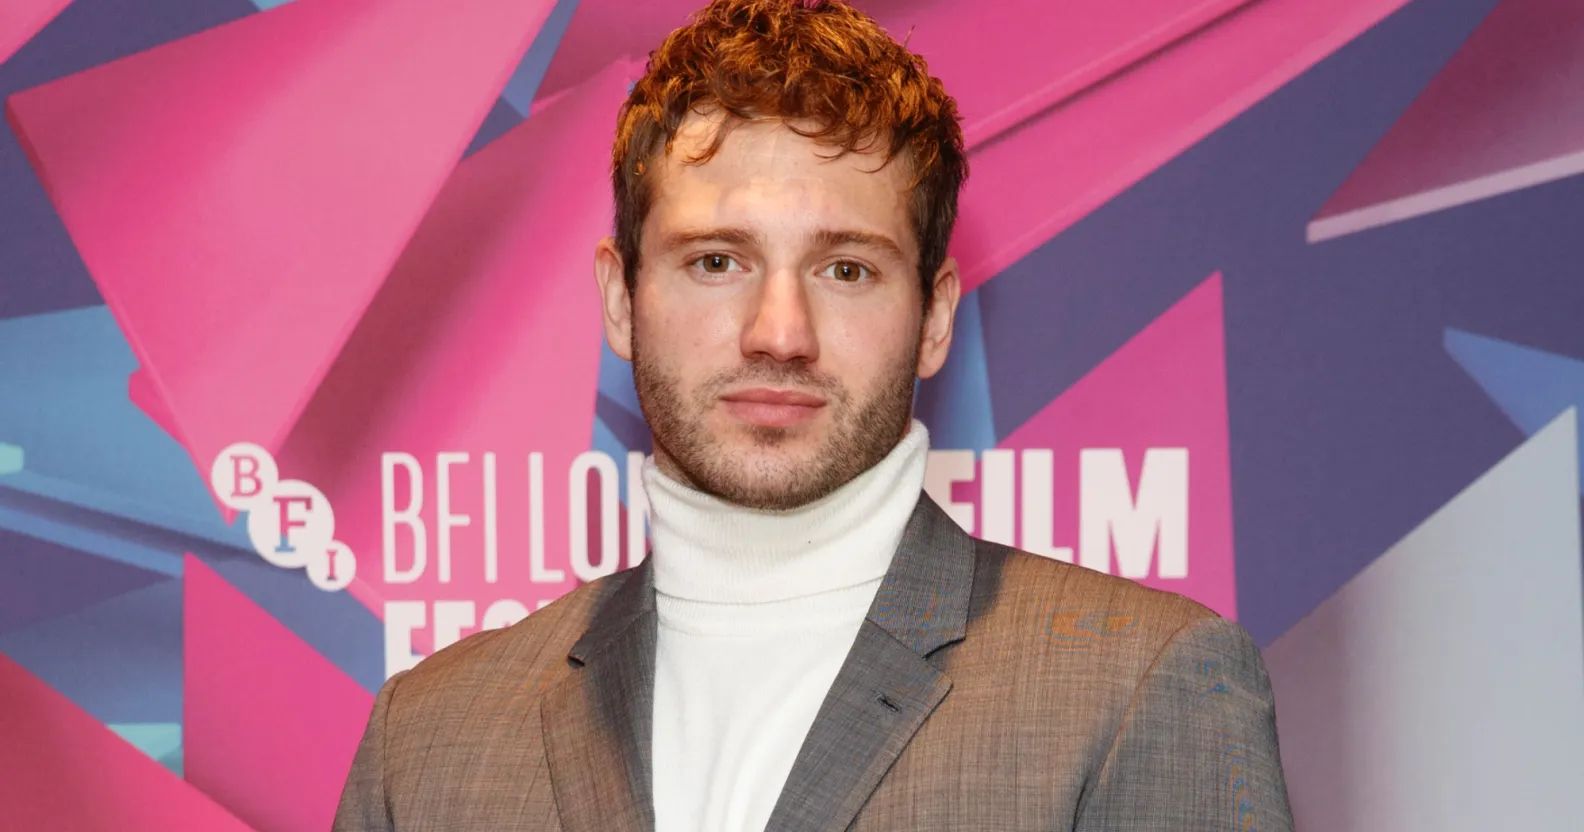 Actor Alexander Lincoln wearing a silver grey suit jacket over a white turtleneck sweater poses for the cameras at the London Film Festival. (Getty)